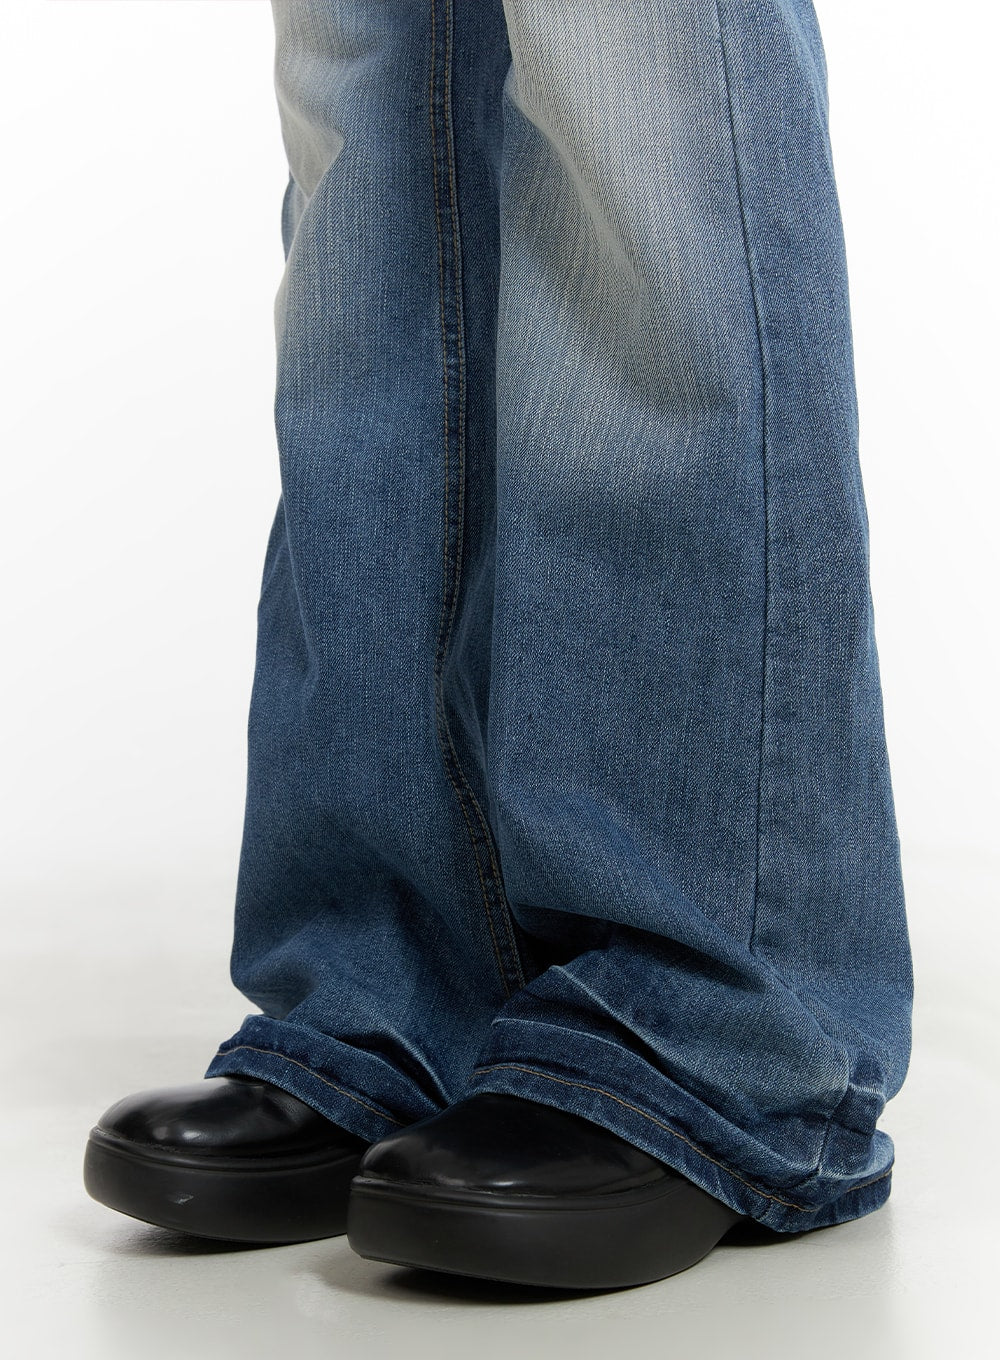 washed-low-waist-bootcut-jeans-ca412